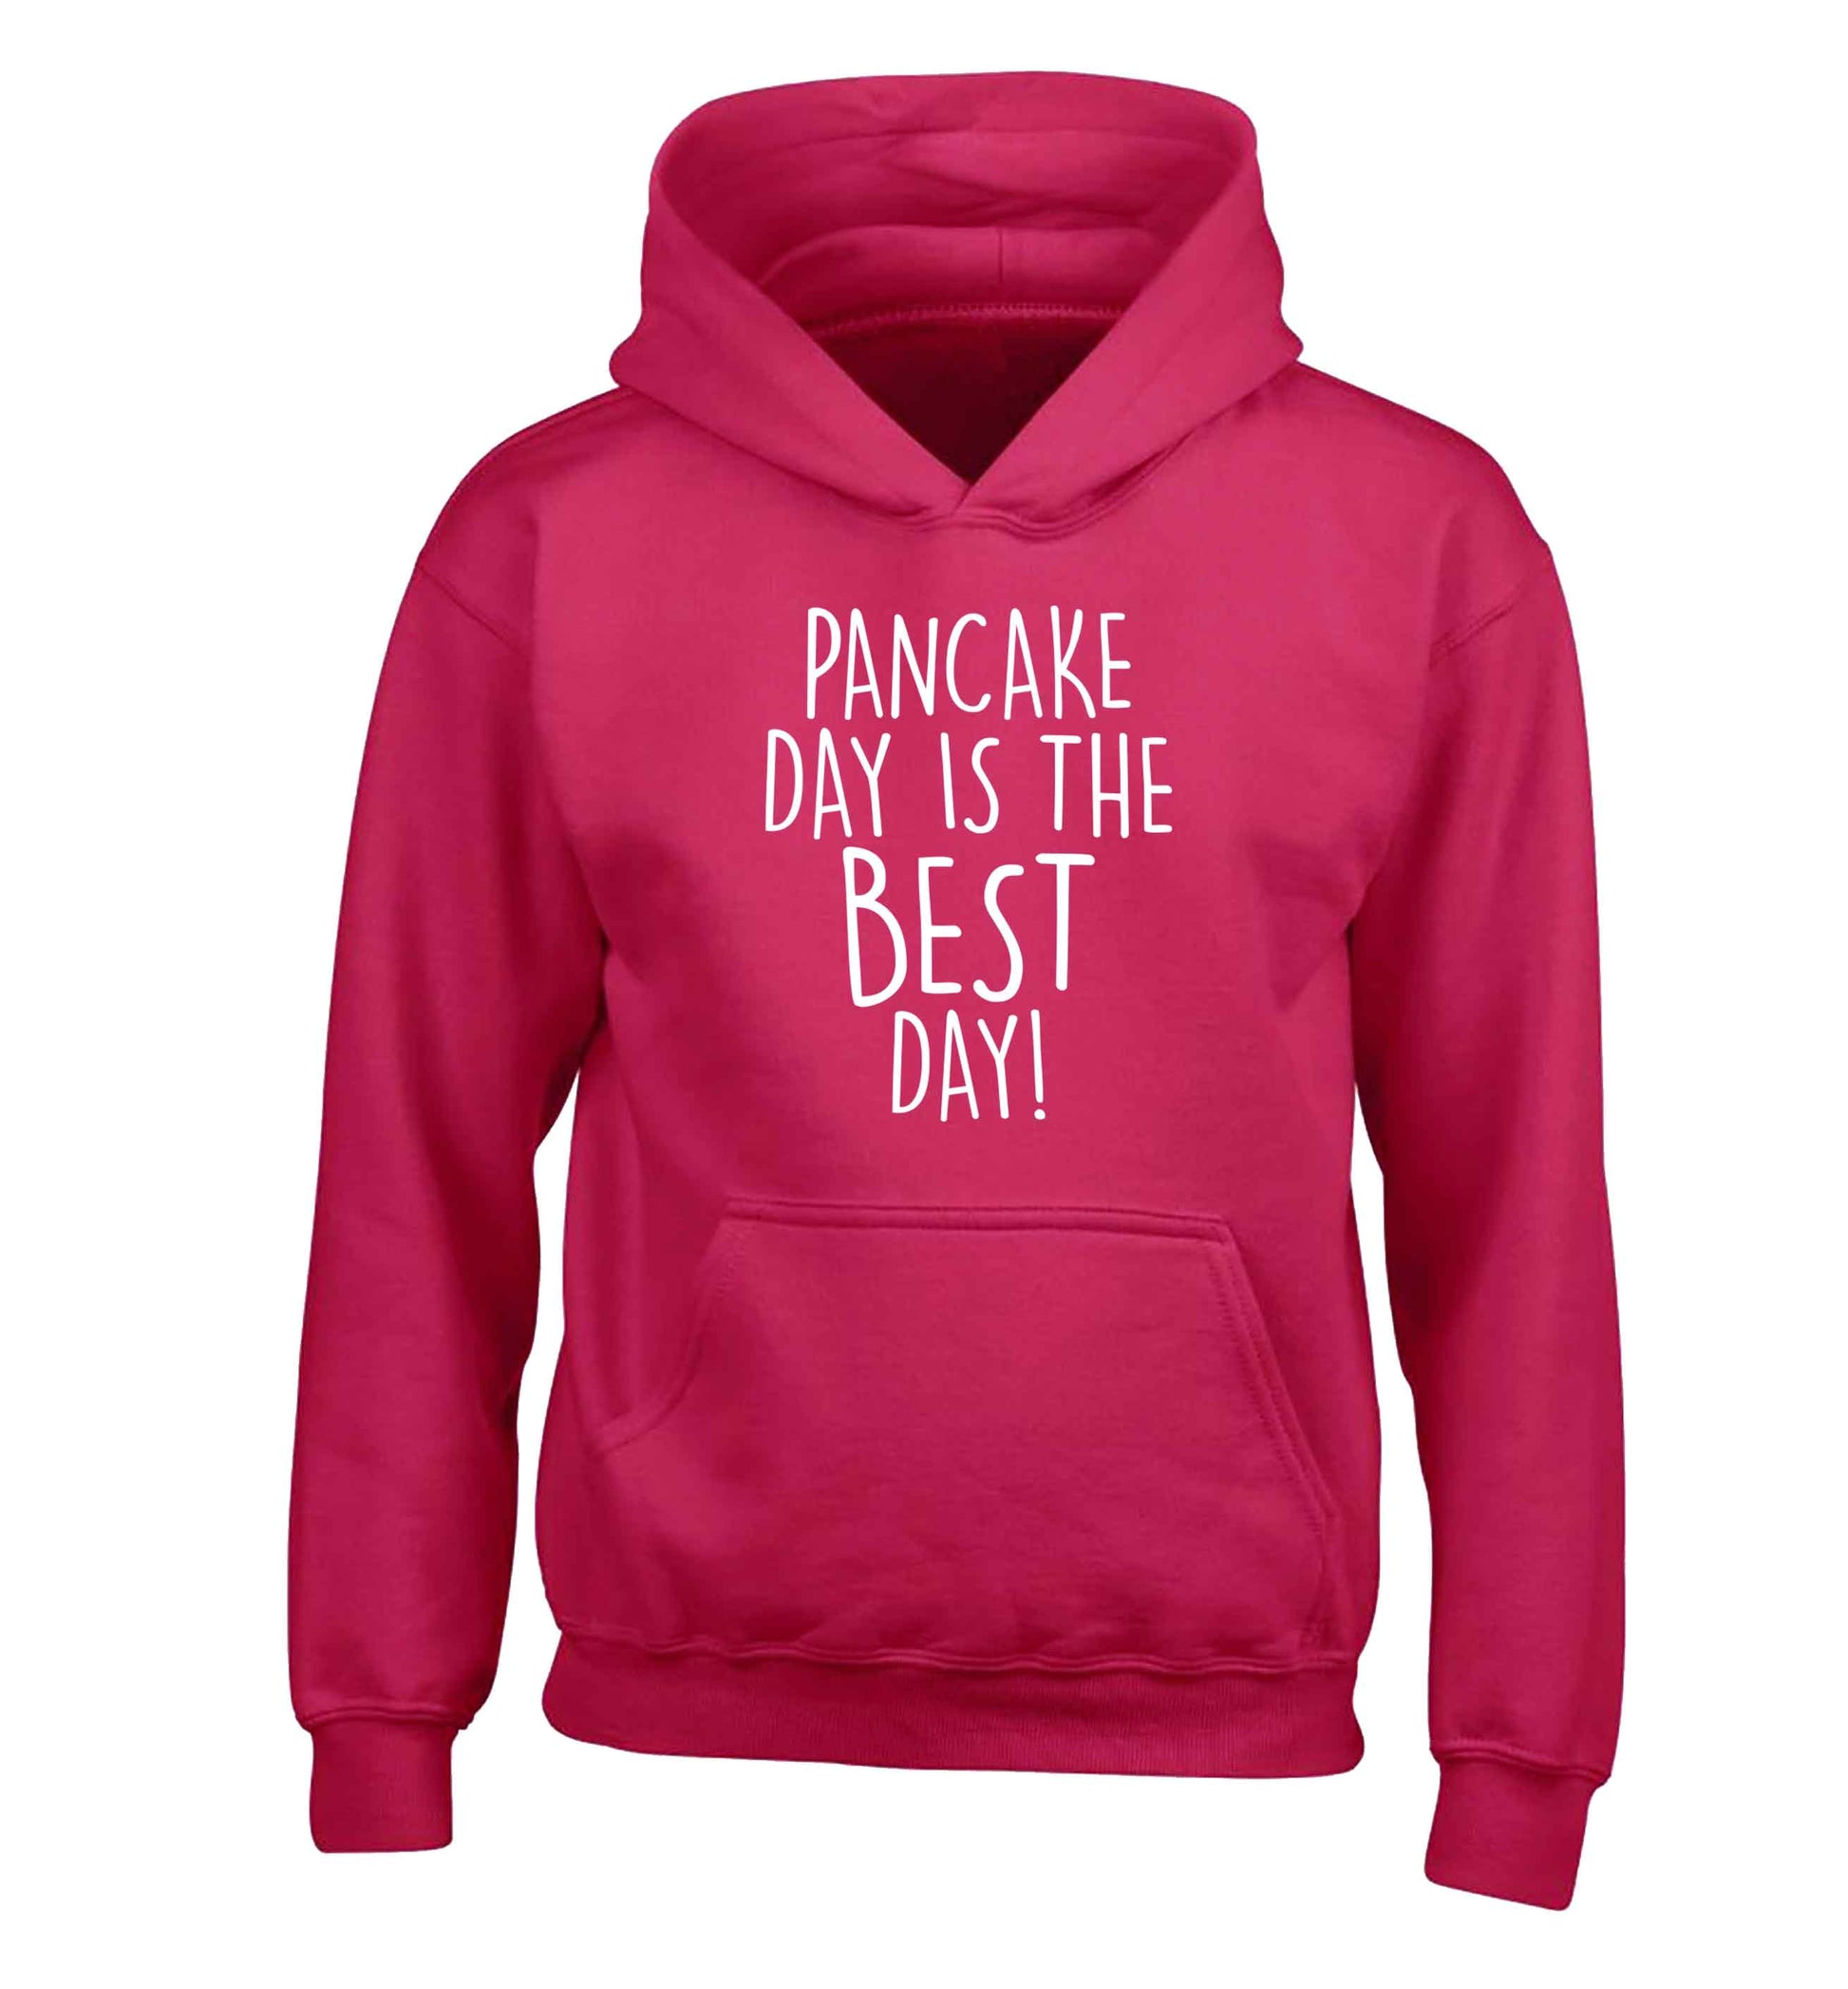 Pancake day is the best day children's pink hoodie 12-13 Years